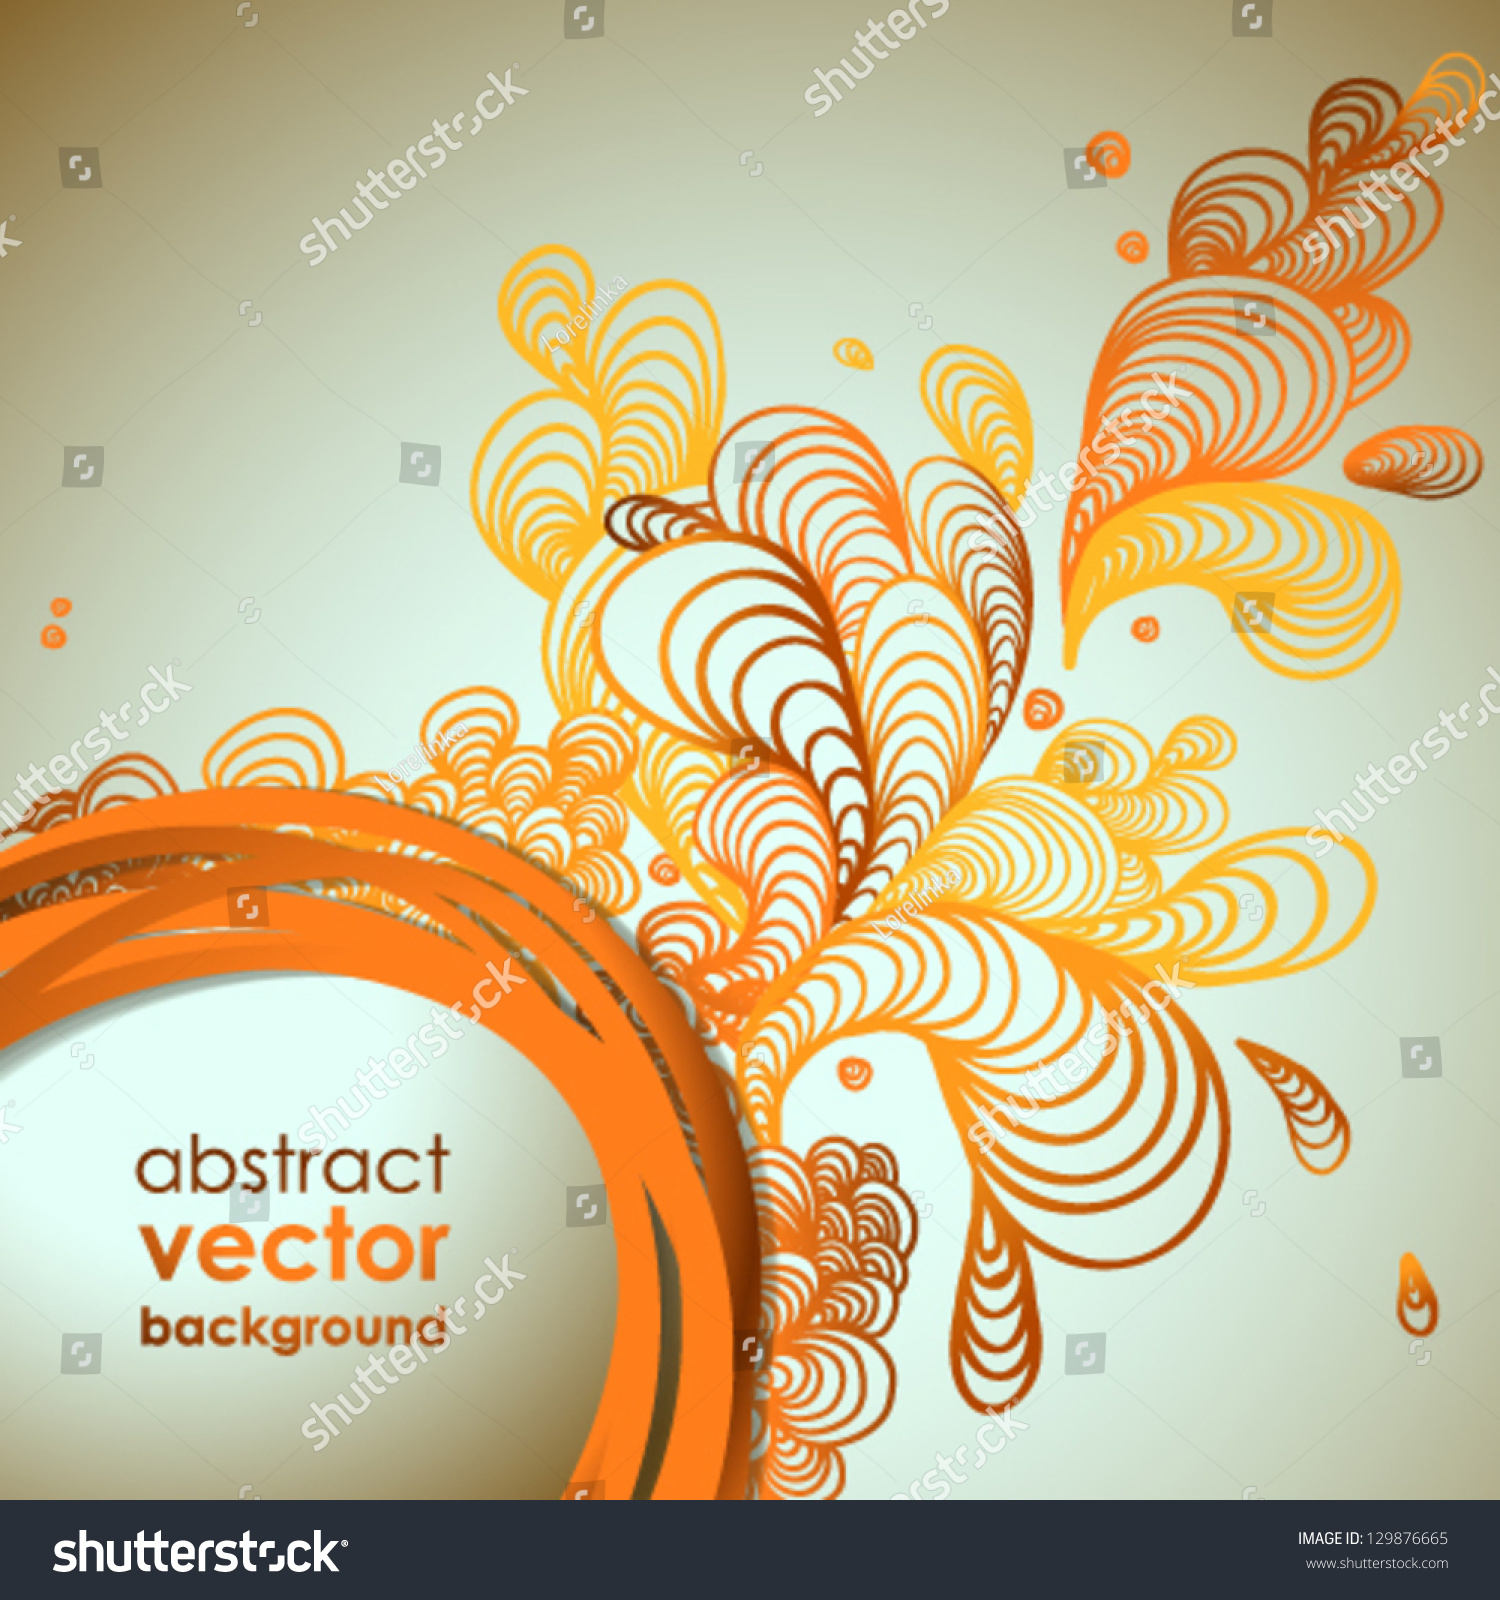 Funky Graphic Design - Abstract Background Stock Vector Illustration